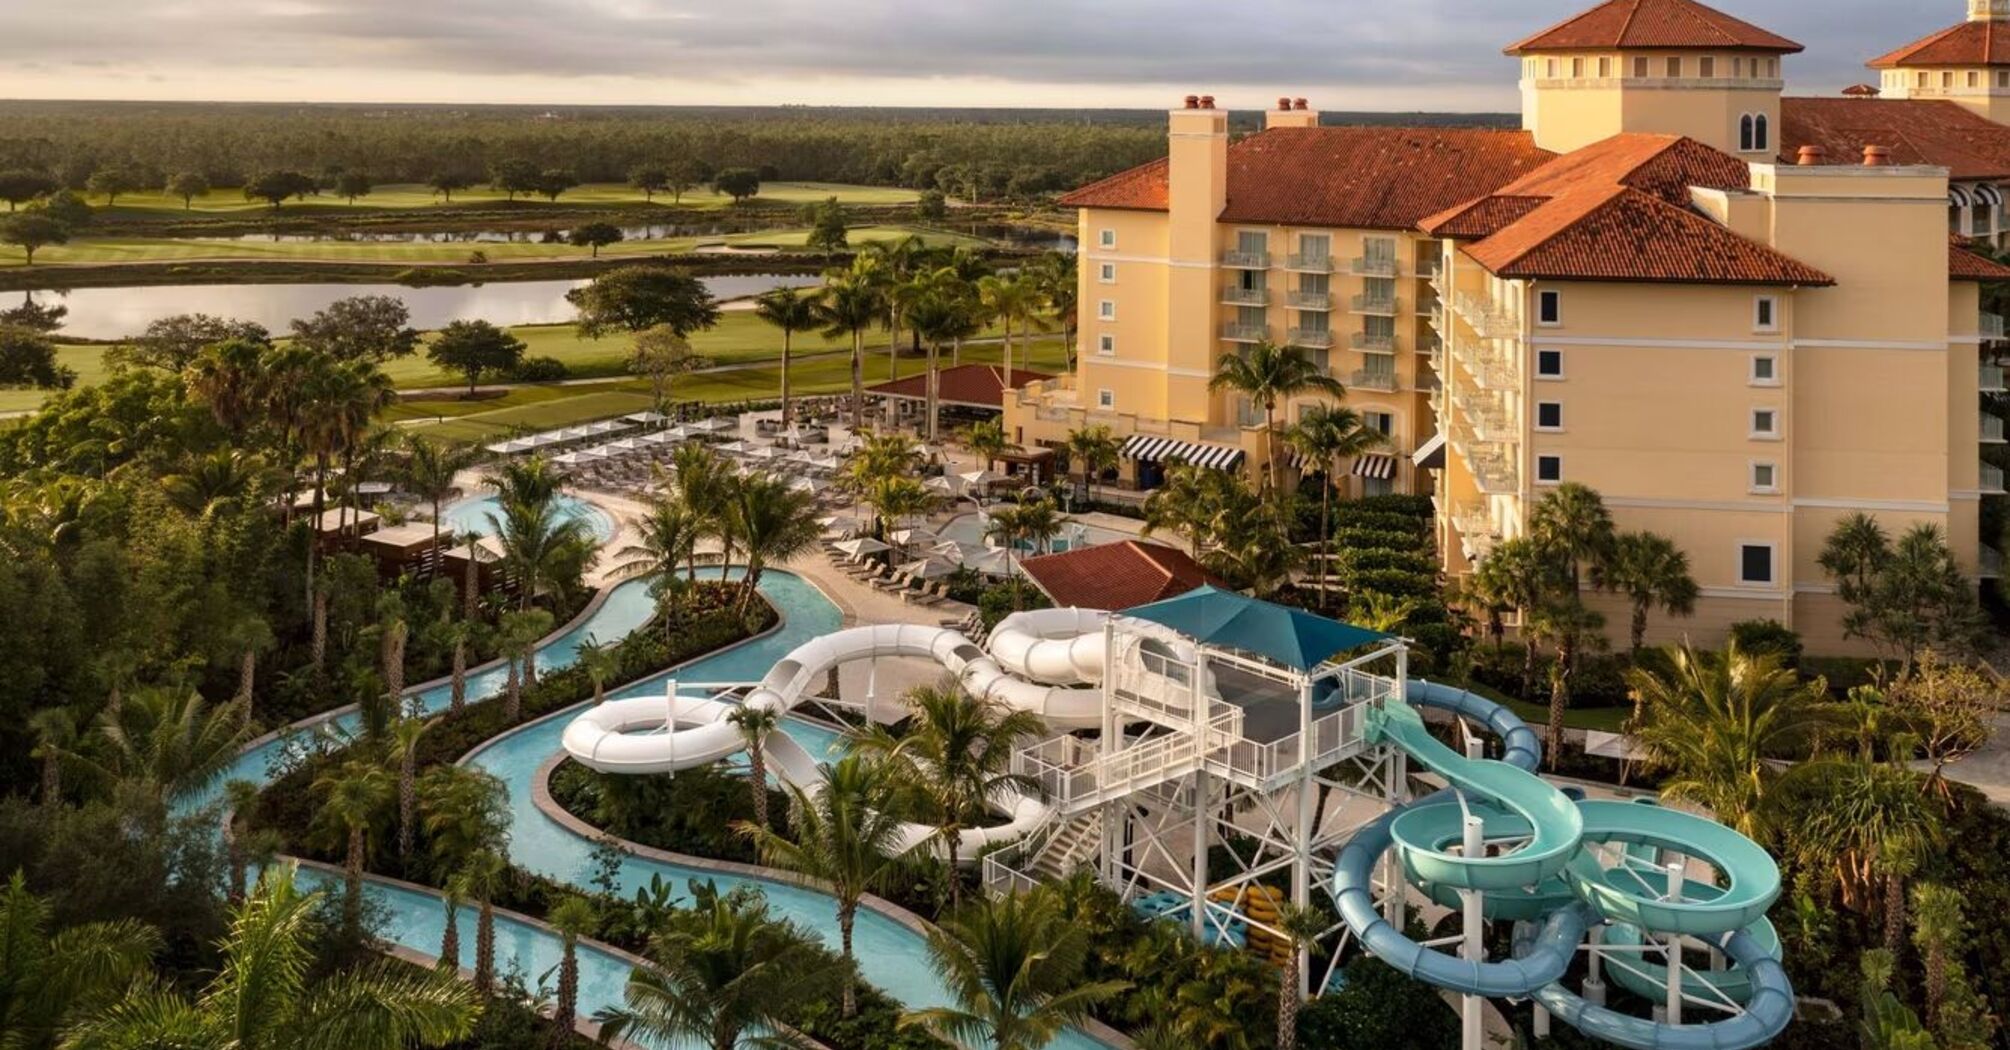 Top 13 hotels in the USA with amazing water parks, from steep water slides and underwater music pools to open-air whirlpools and lazy rivers with waterfalls.